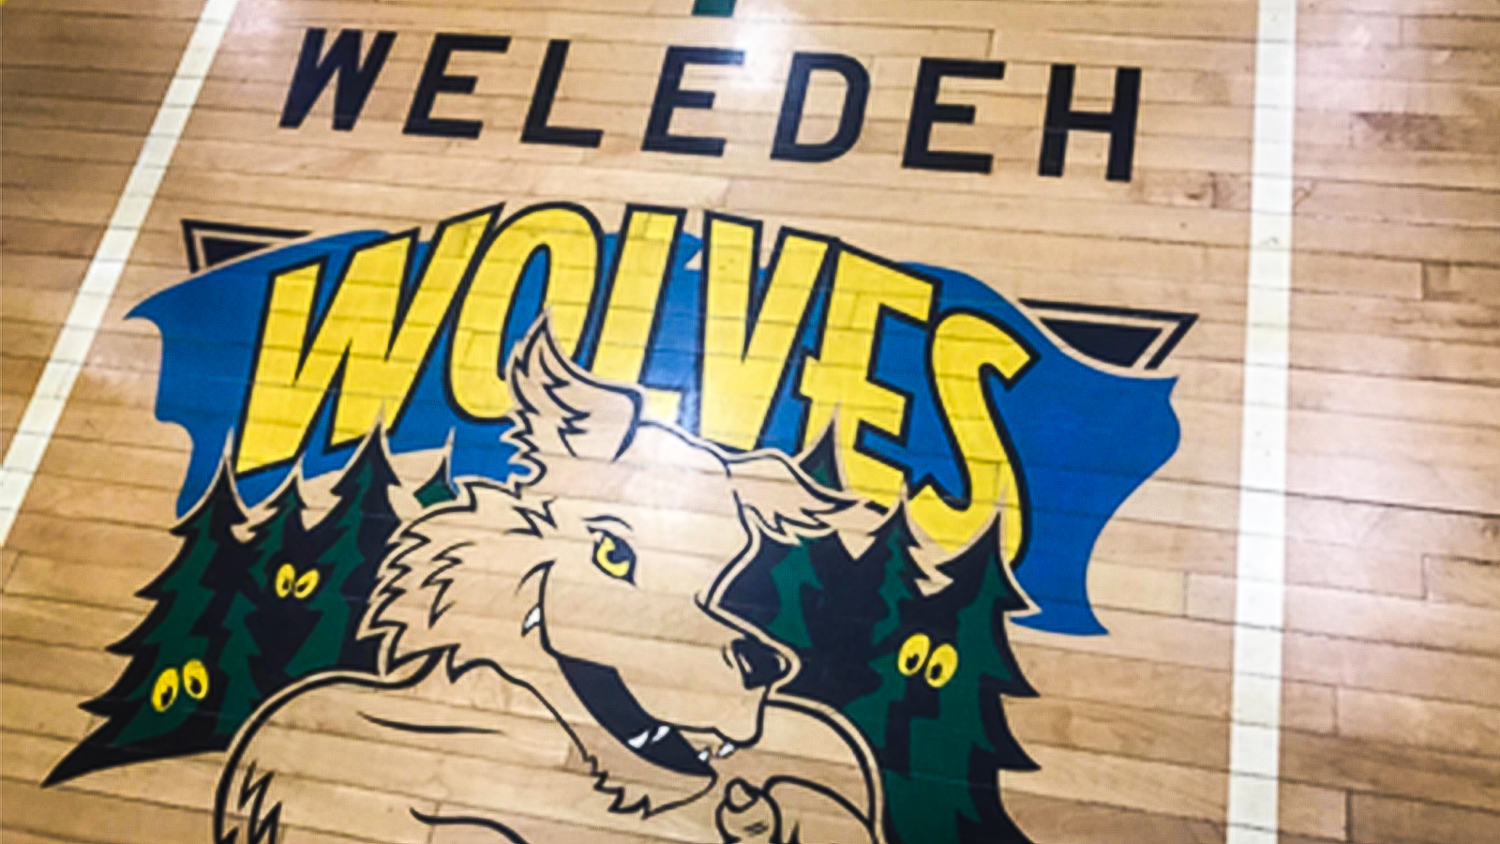 An image of the Weledeh Wolves logo on the school's gym floor, included in a presentation advocating for the school's name to change